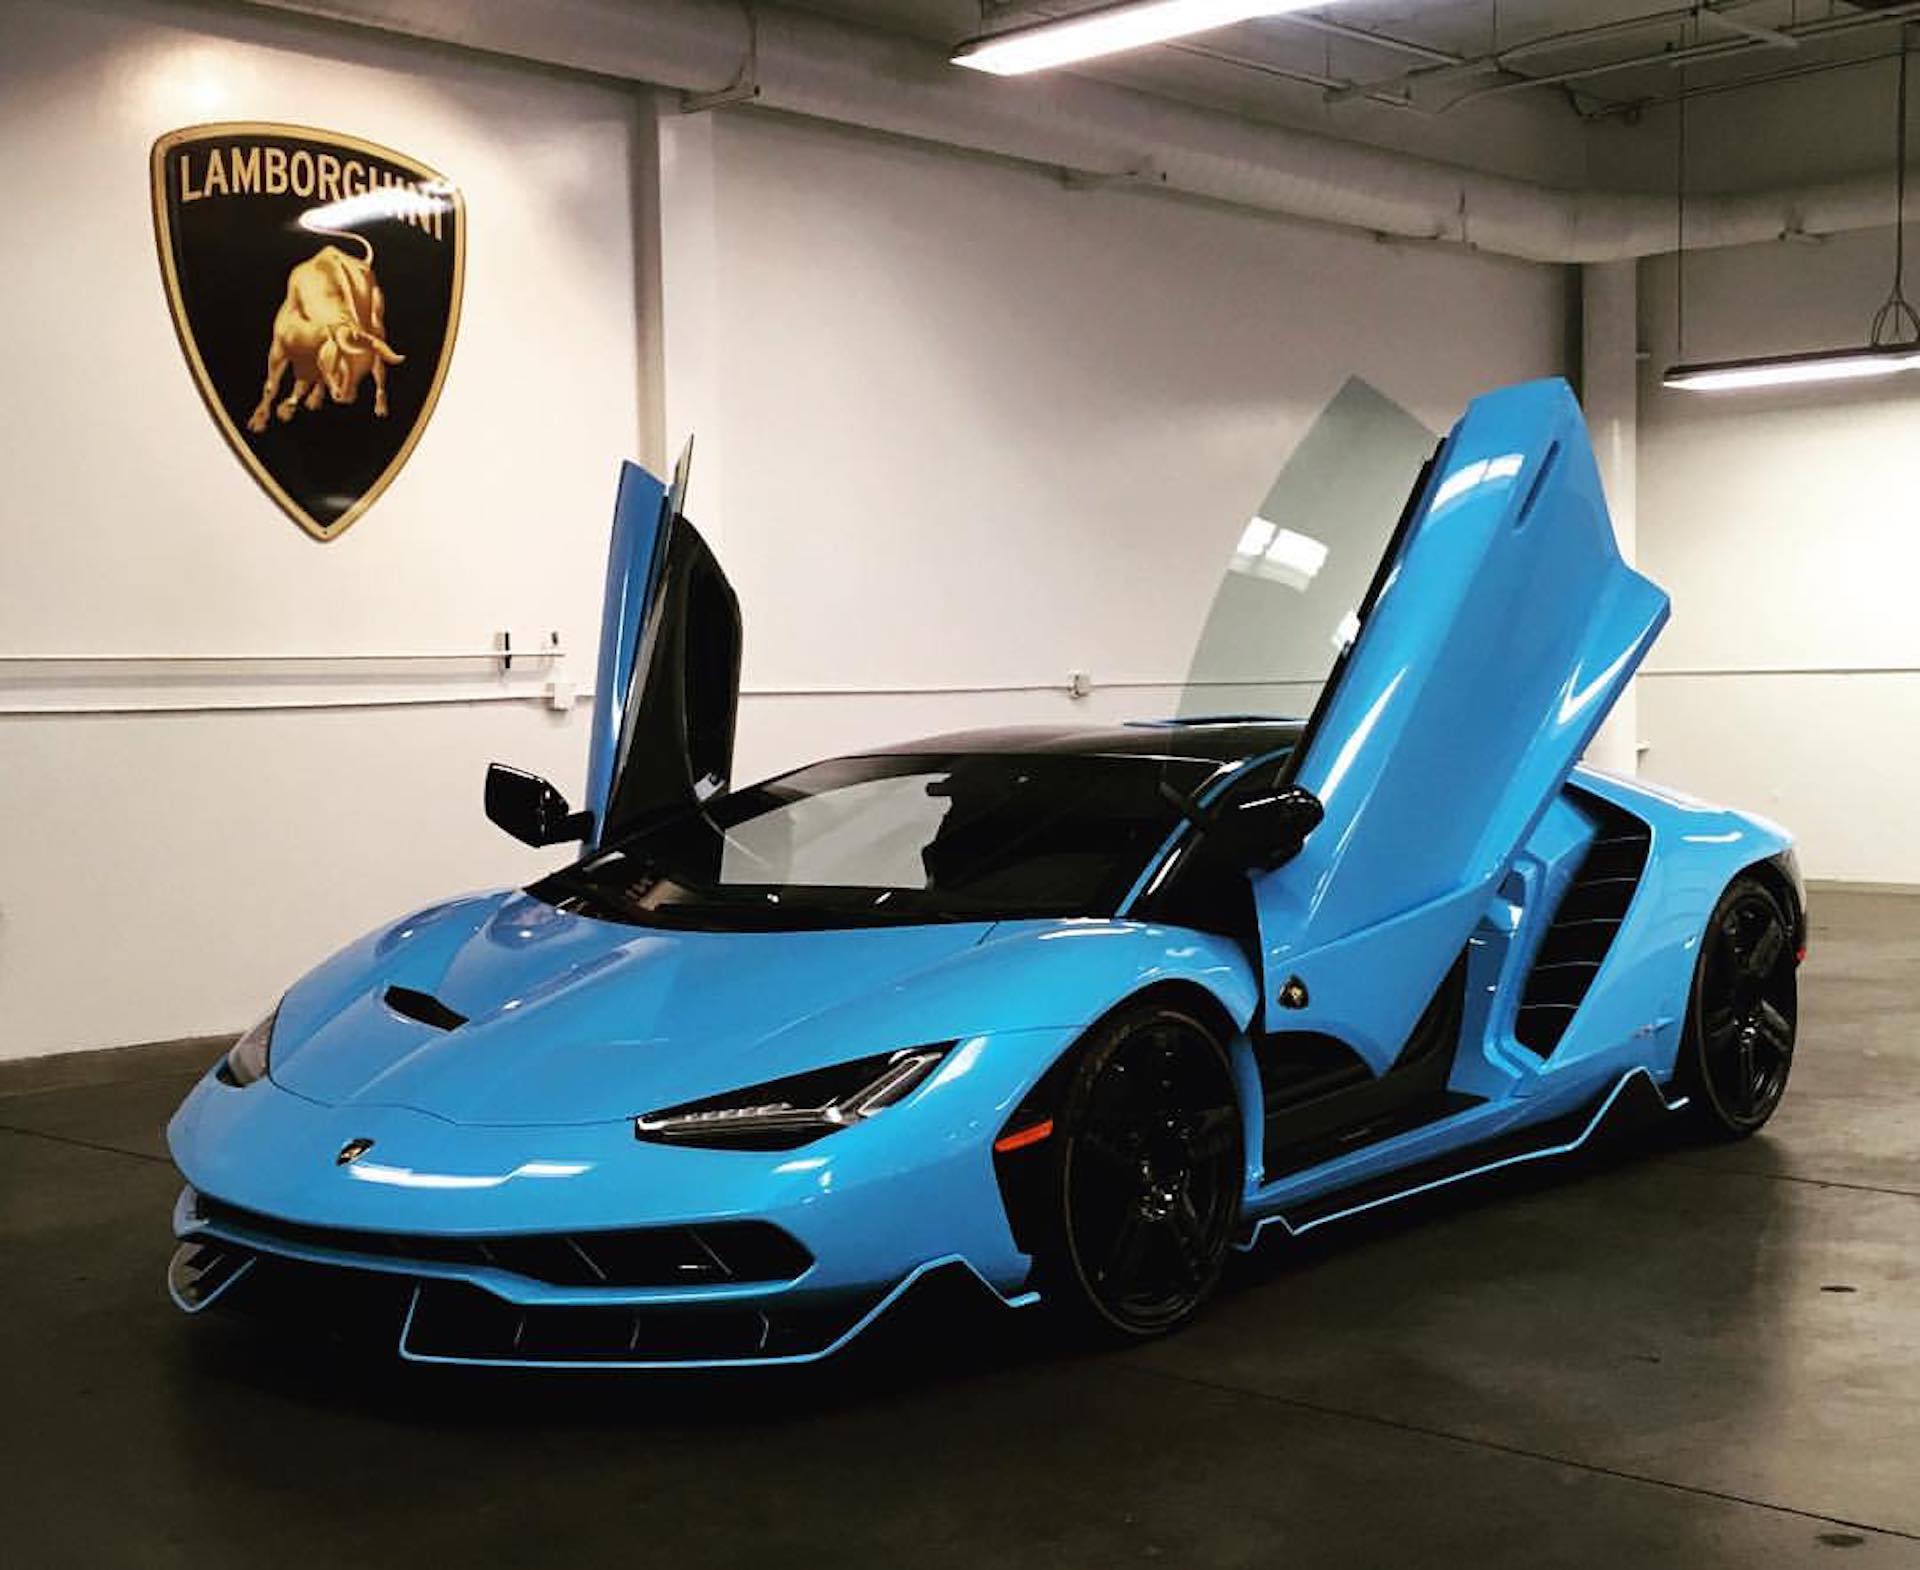 The fourth Lamborghini Centenario has landed in the US and it's baby blue